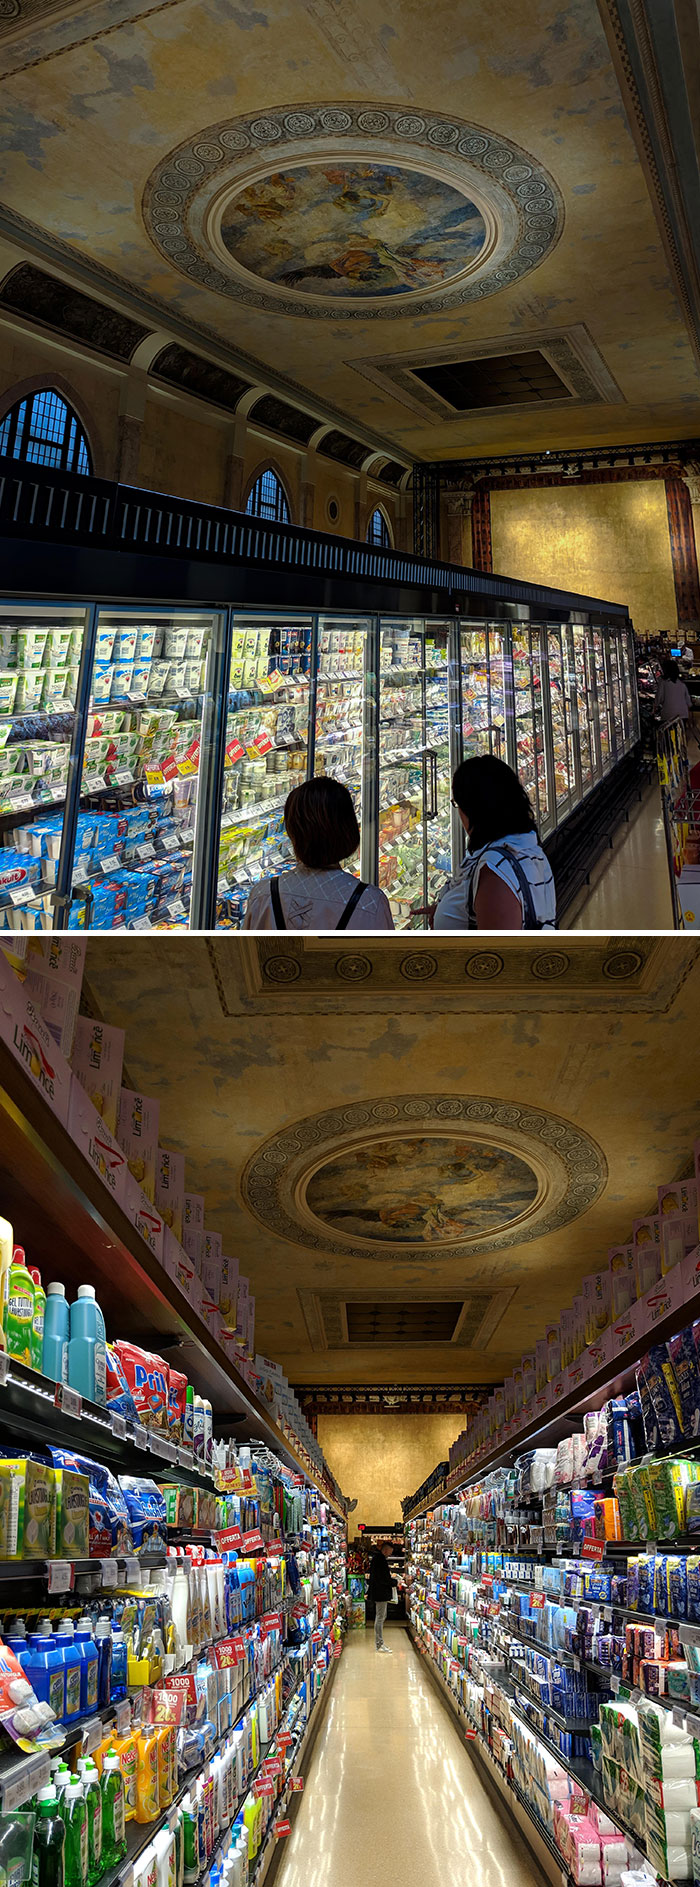 This Supermarket In An Old Theatre In Venice, Italy